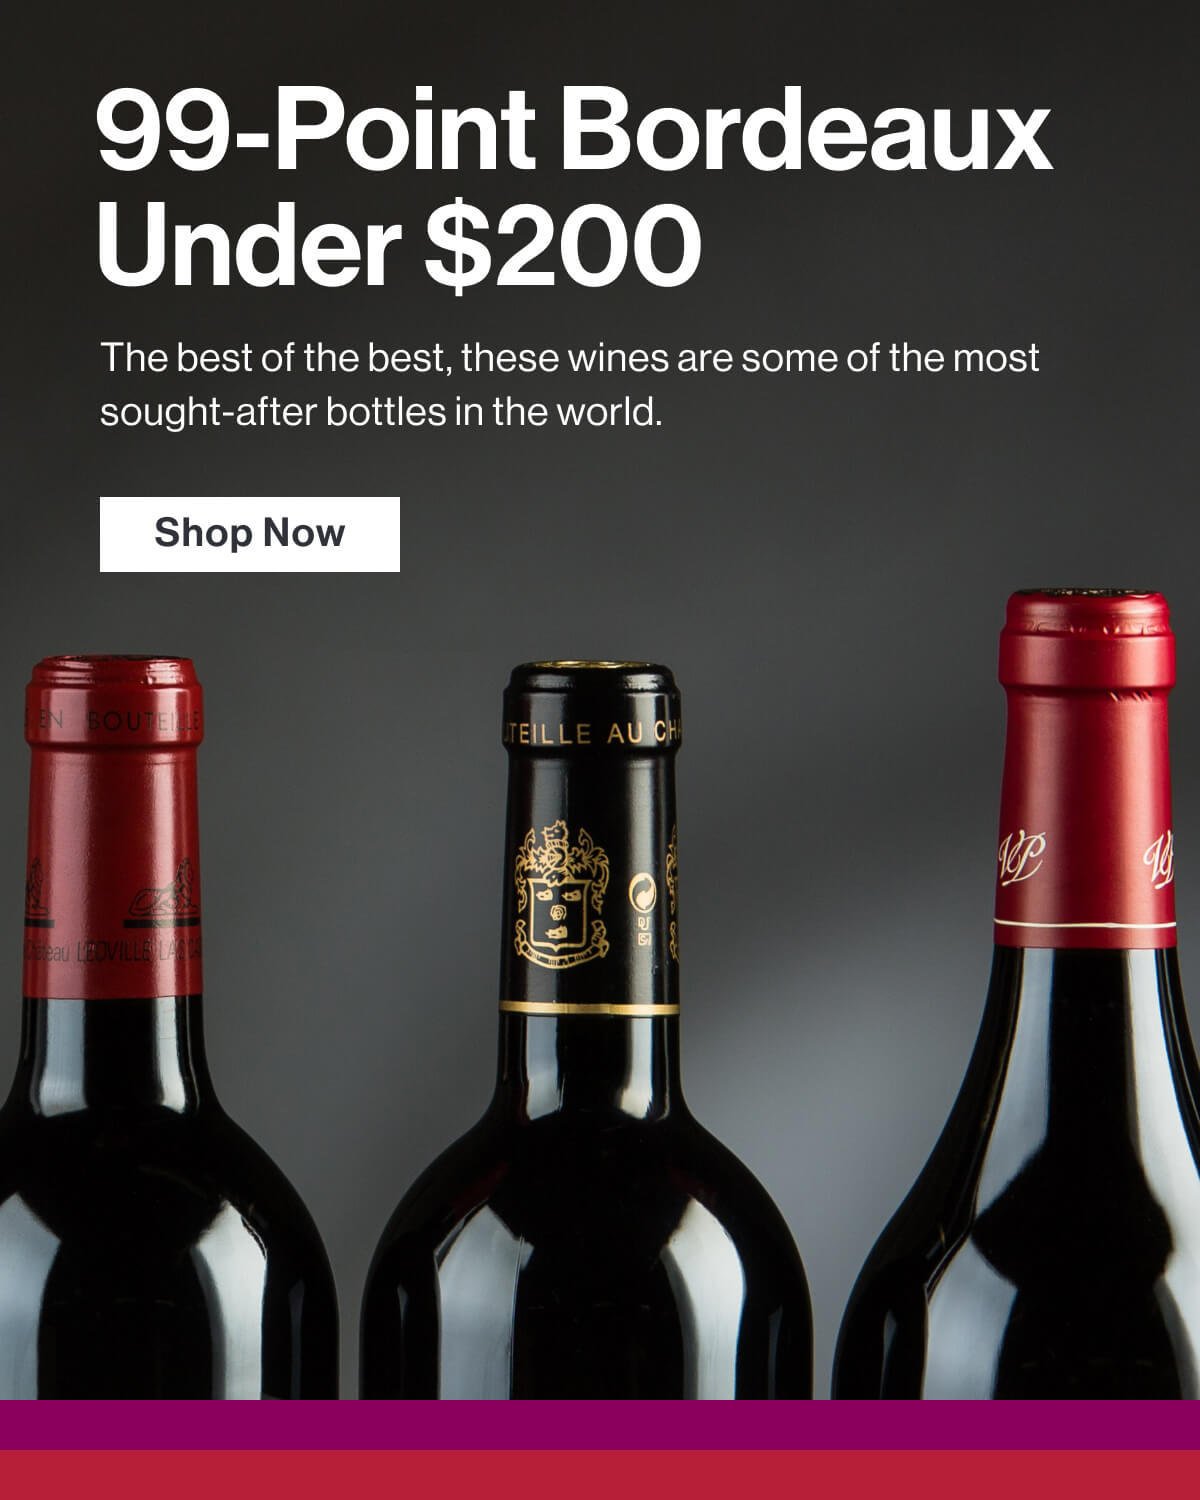 100-pt Bordeaux under $200 - The best of the best, these wines are some of the most sought after in the world. Shop now.